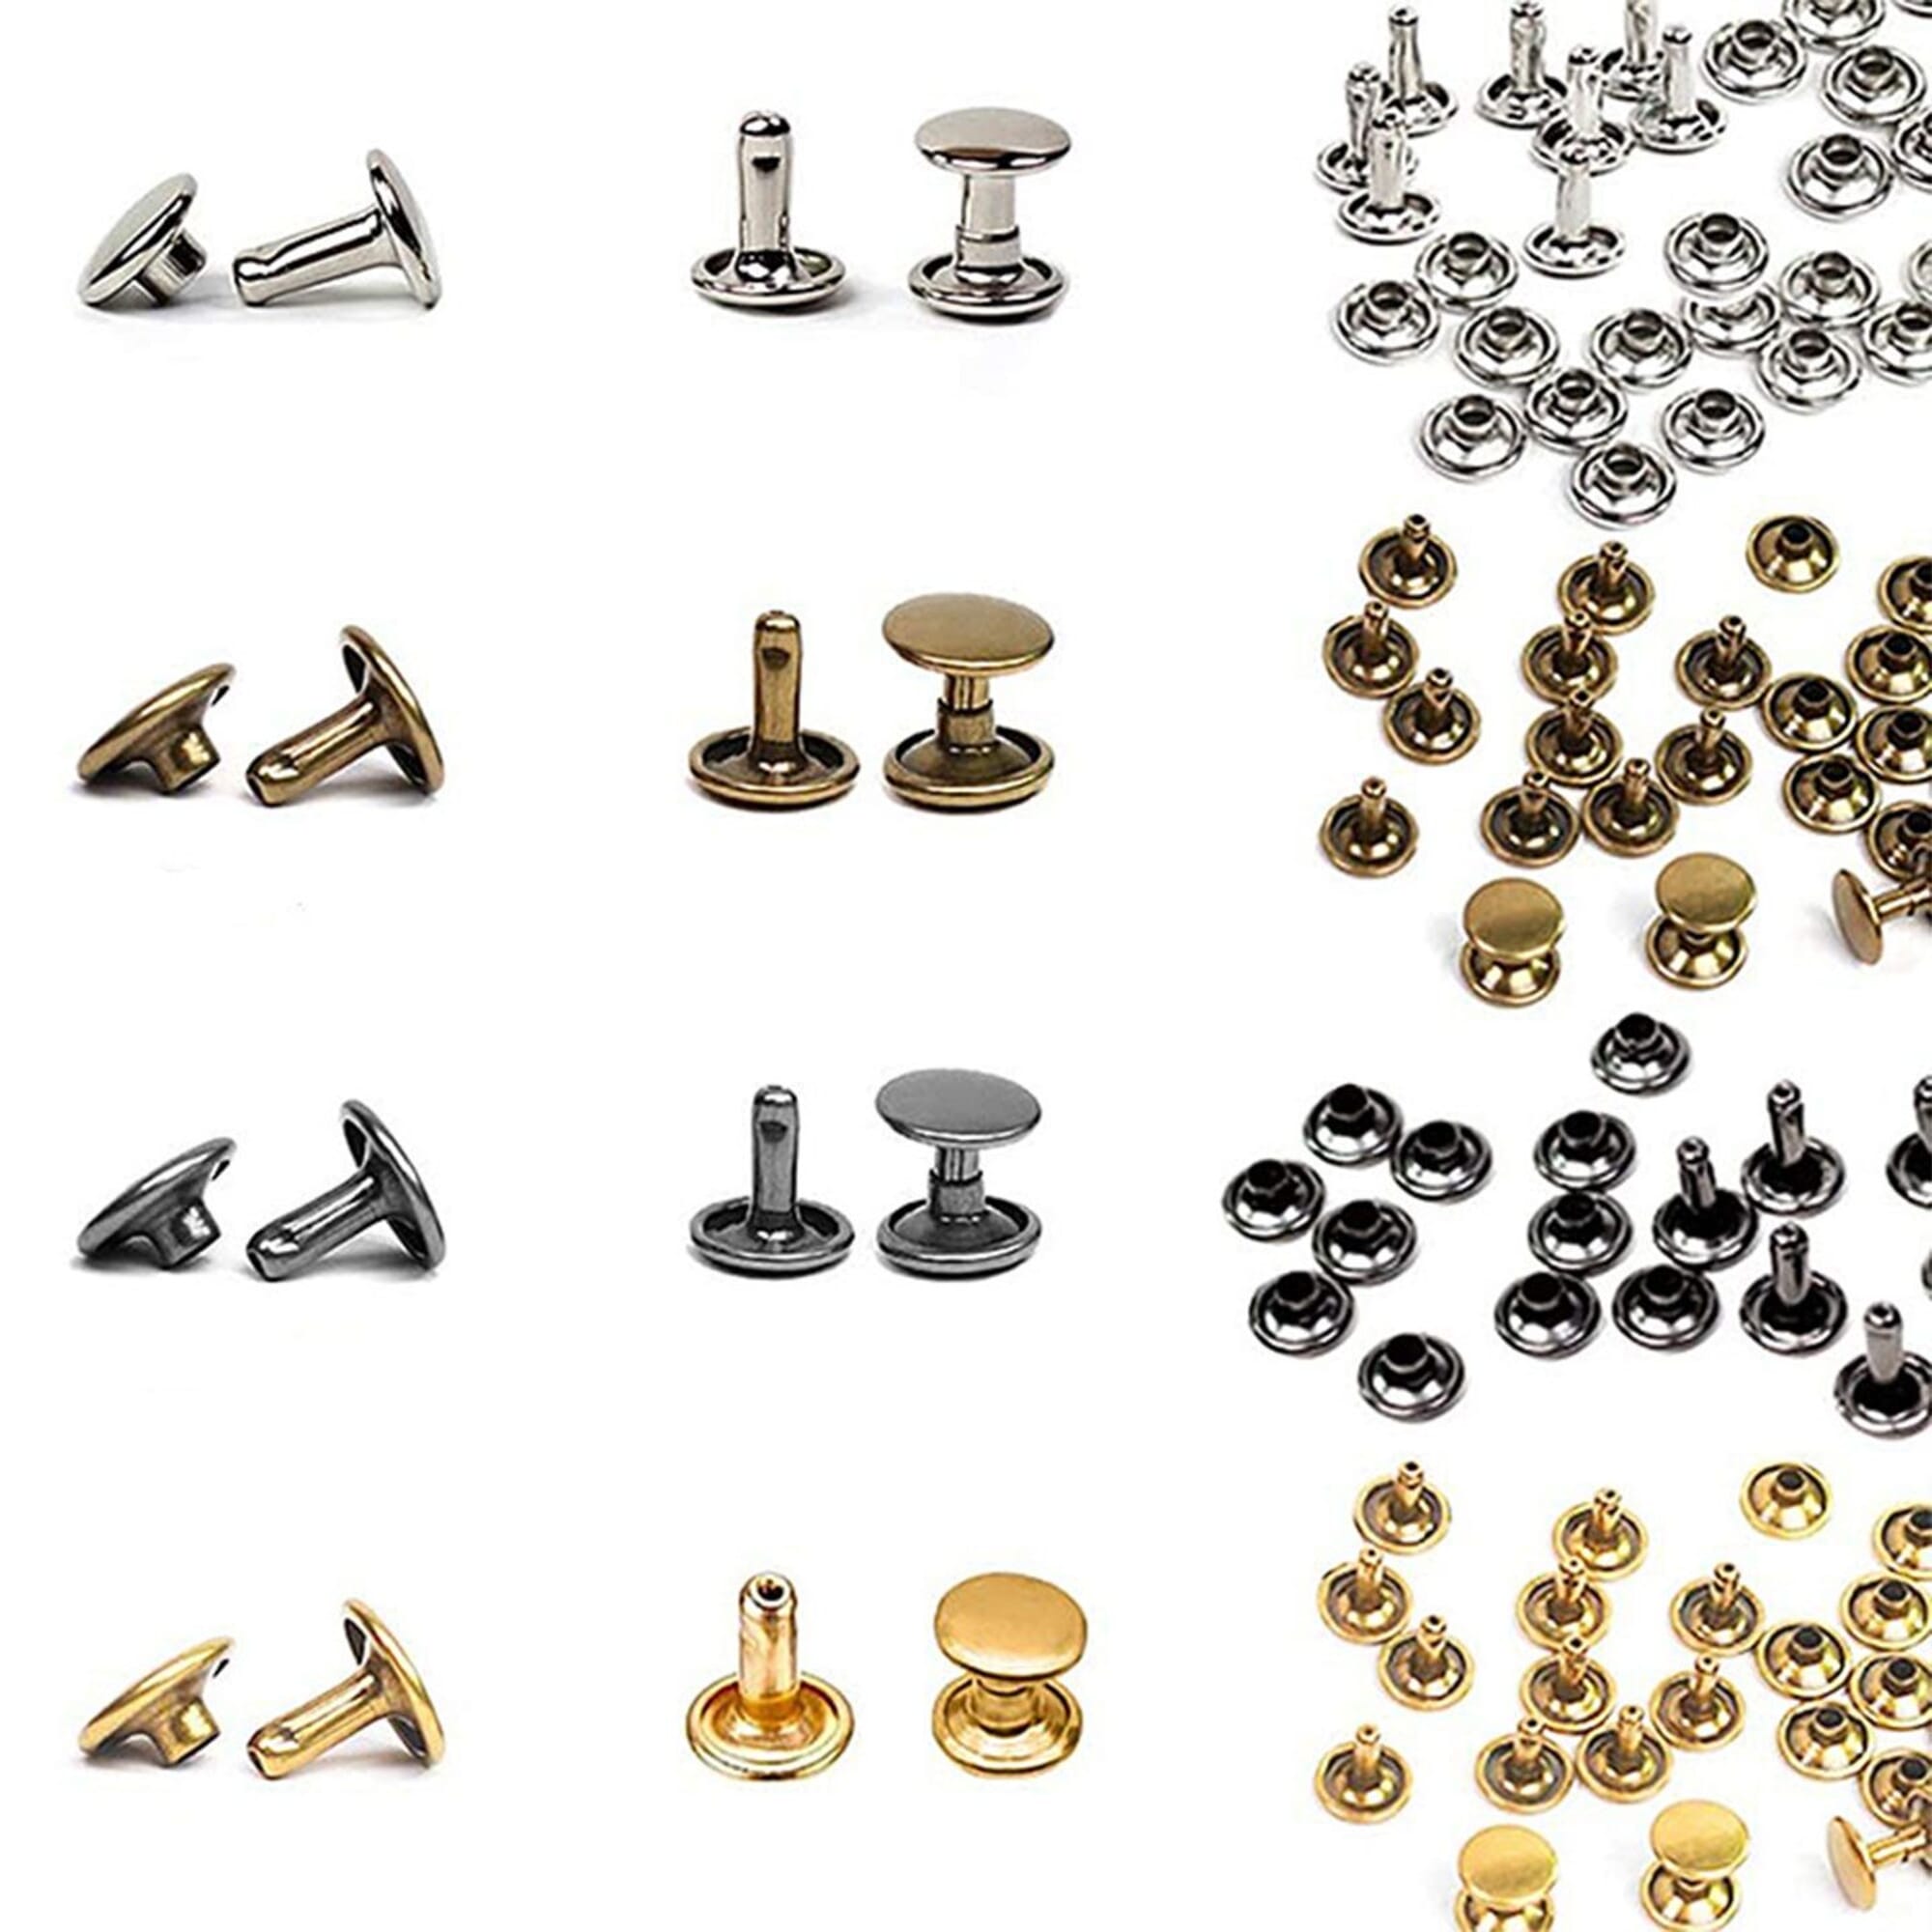  480 Sets Rivets for Leather, Leather Rivet Kit, 4 Colors 3  Sizes Leather Rivets and Snaps for Leather Crafts, Clothes, Shoes, Leather  Boots, Bags, Decoration (Gold, Silver, Bronze and Gunmetal) 